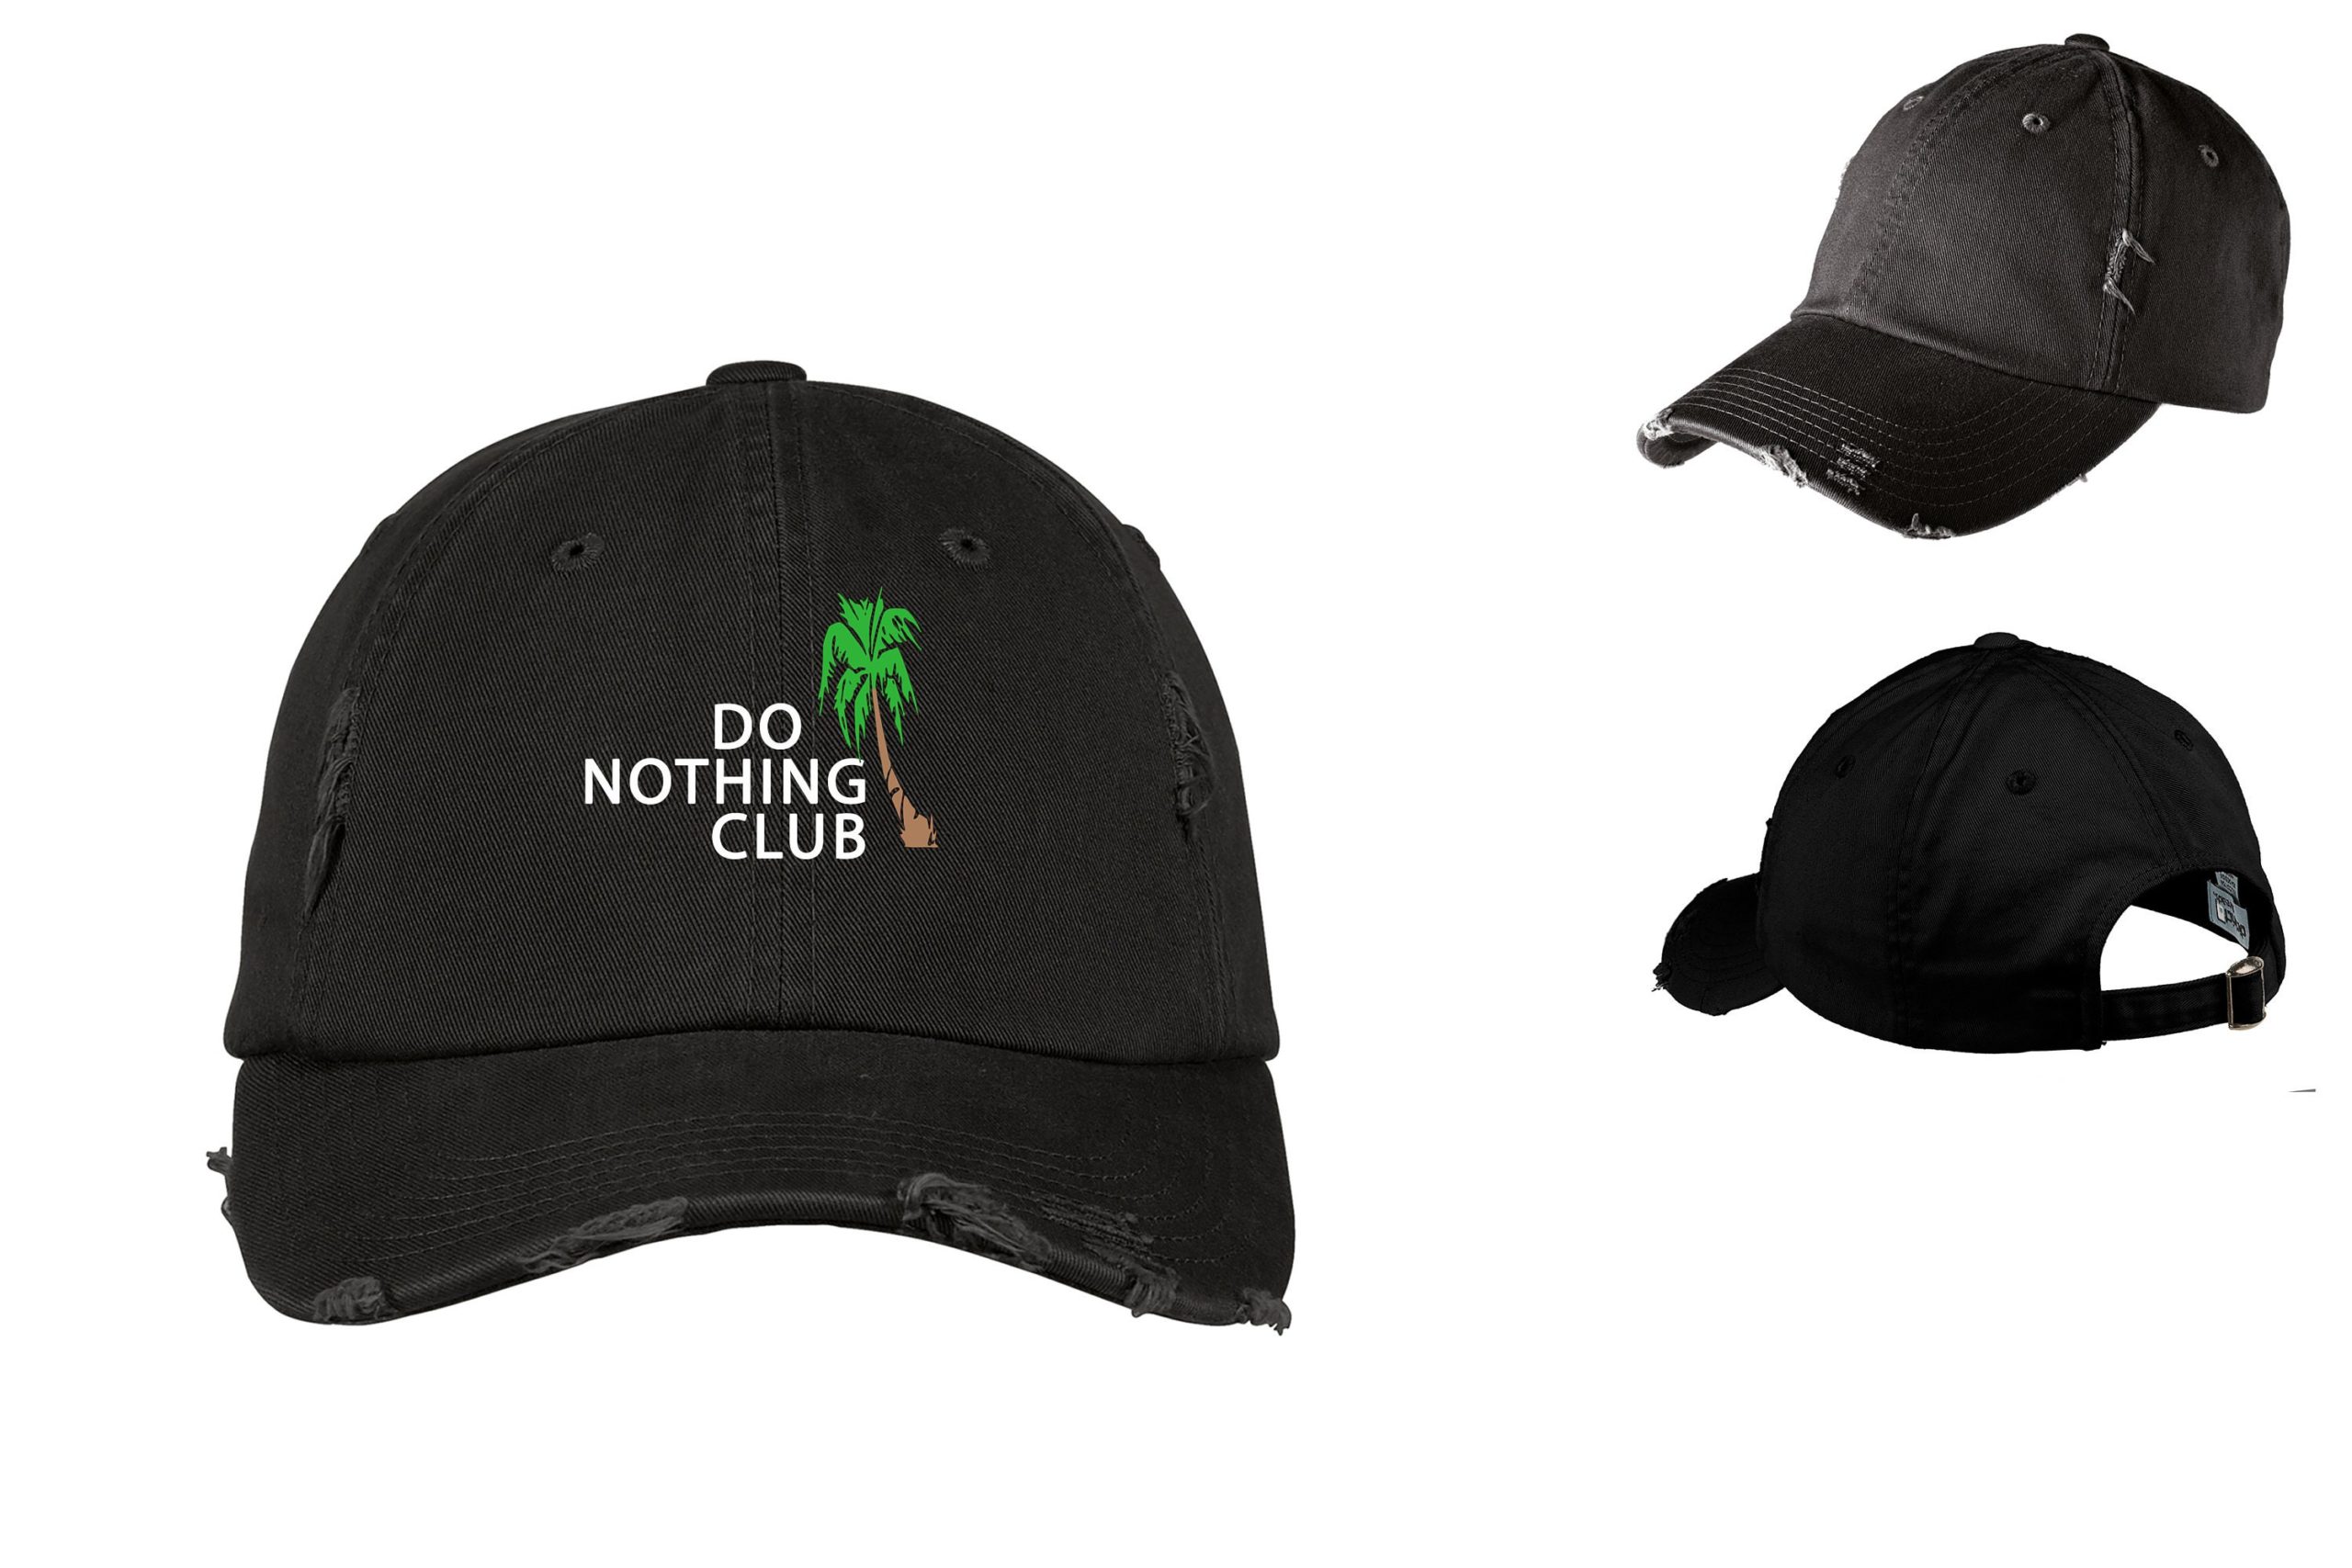 Do Nothing Club - Custom Embroidery Adjustable Vintage Style Dad's Cap -  Baseball Cap - VancouverStitch